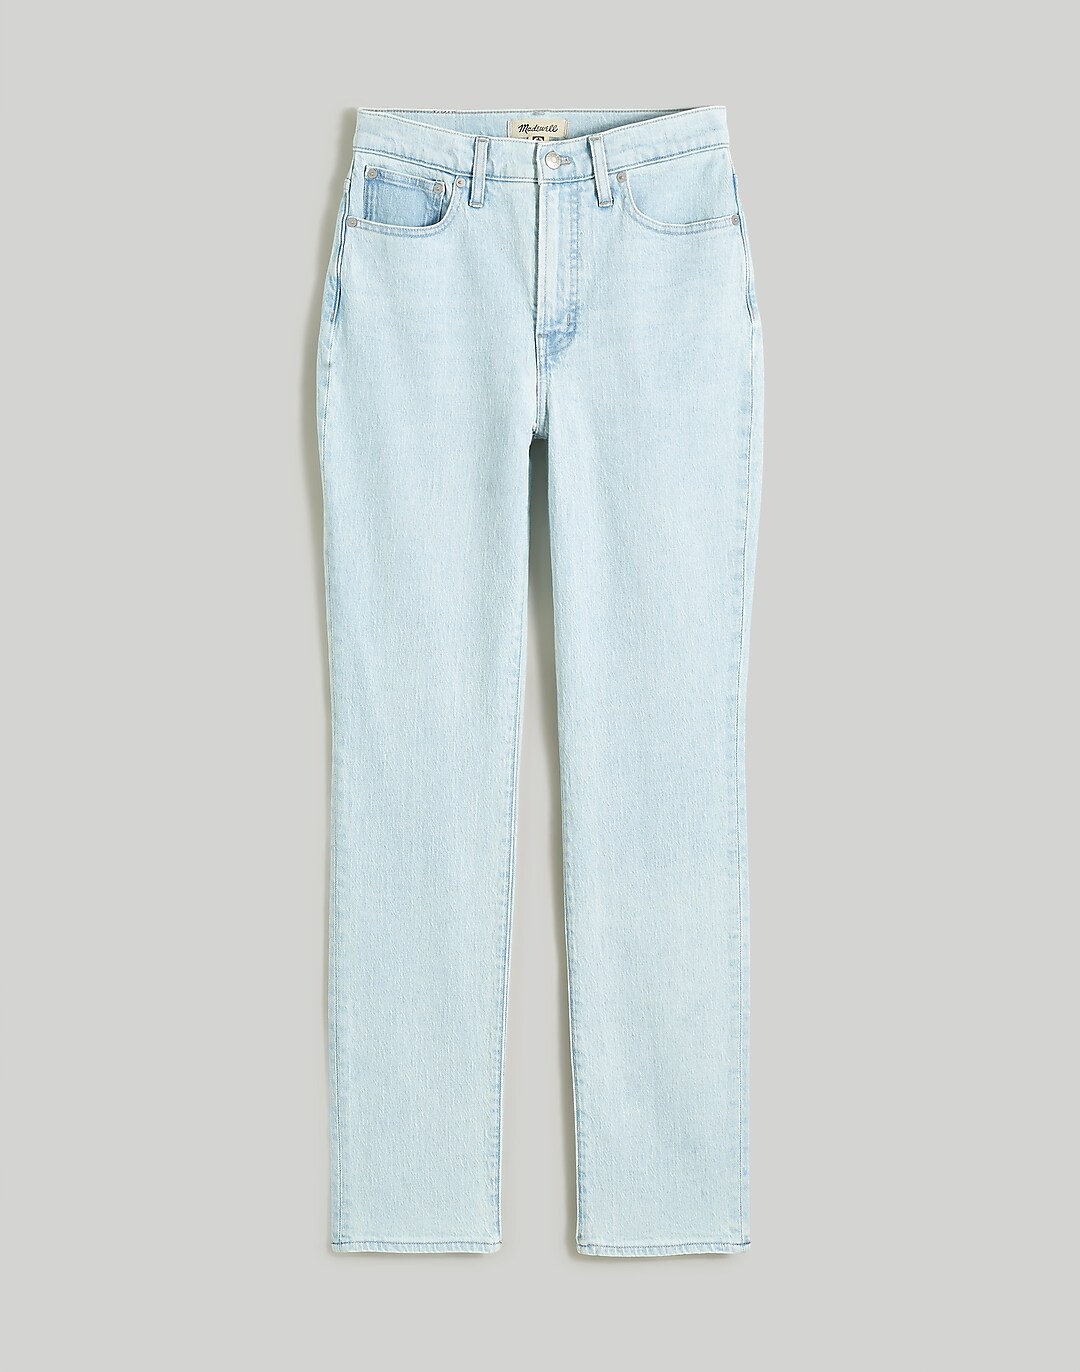 The Perfect Vintage Jean in Chesthunt Wash